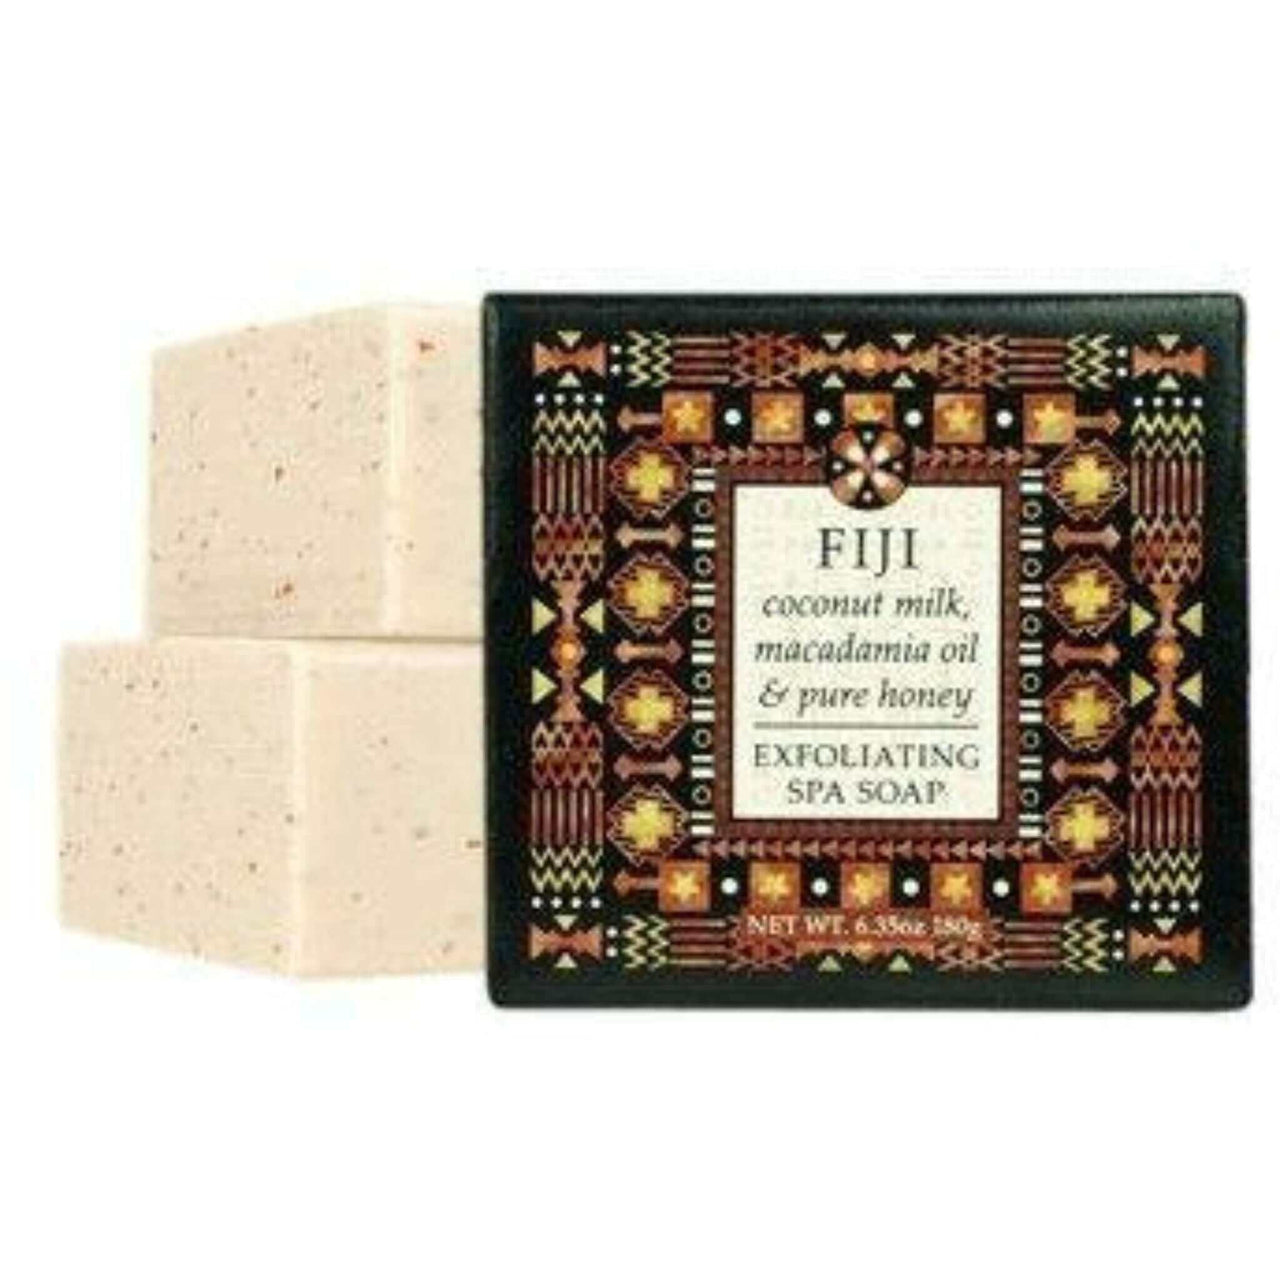 Exfoliating spa soap bars with Fiji coconut milk, macadamia oil, and pure honey displayed on a decorative patterned packaging